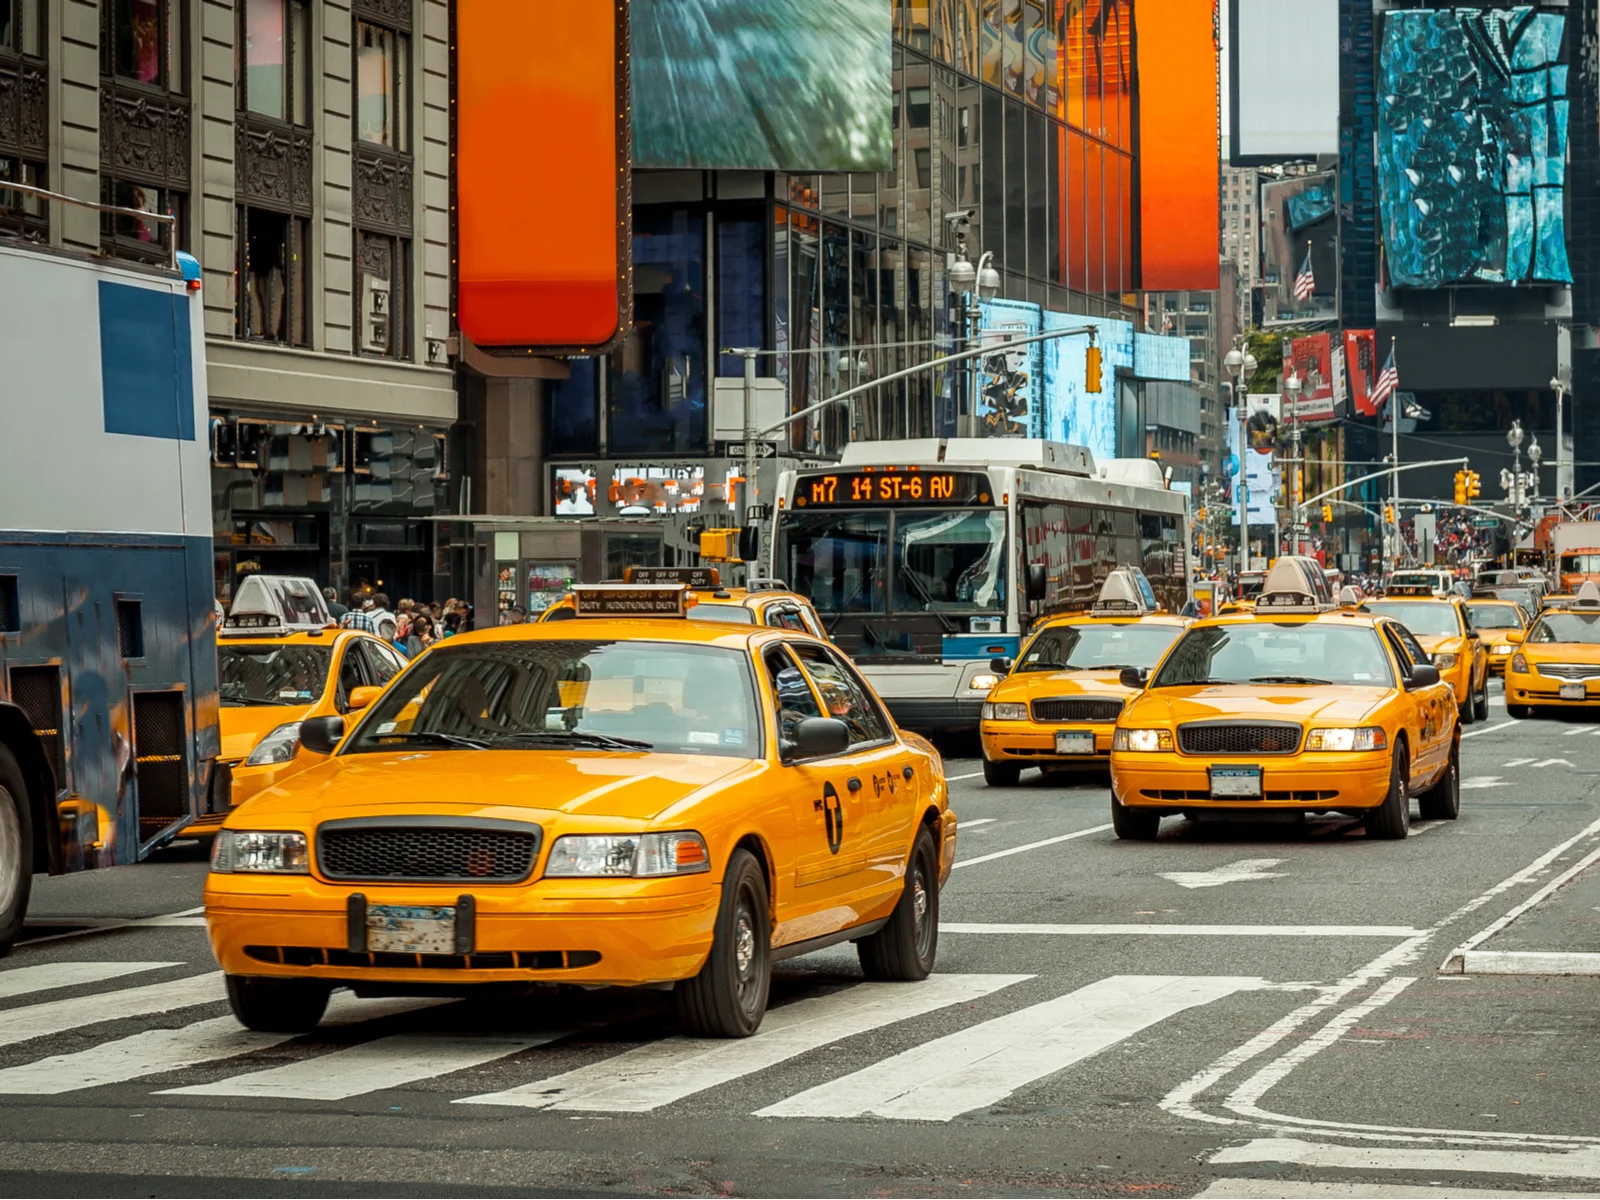 NYC taxi cabs, one of the best things to do in NYC